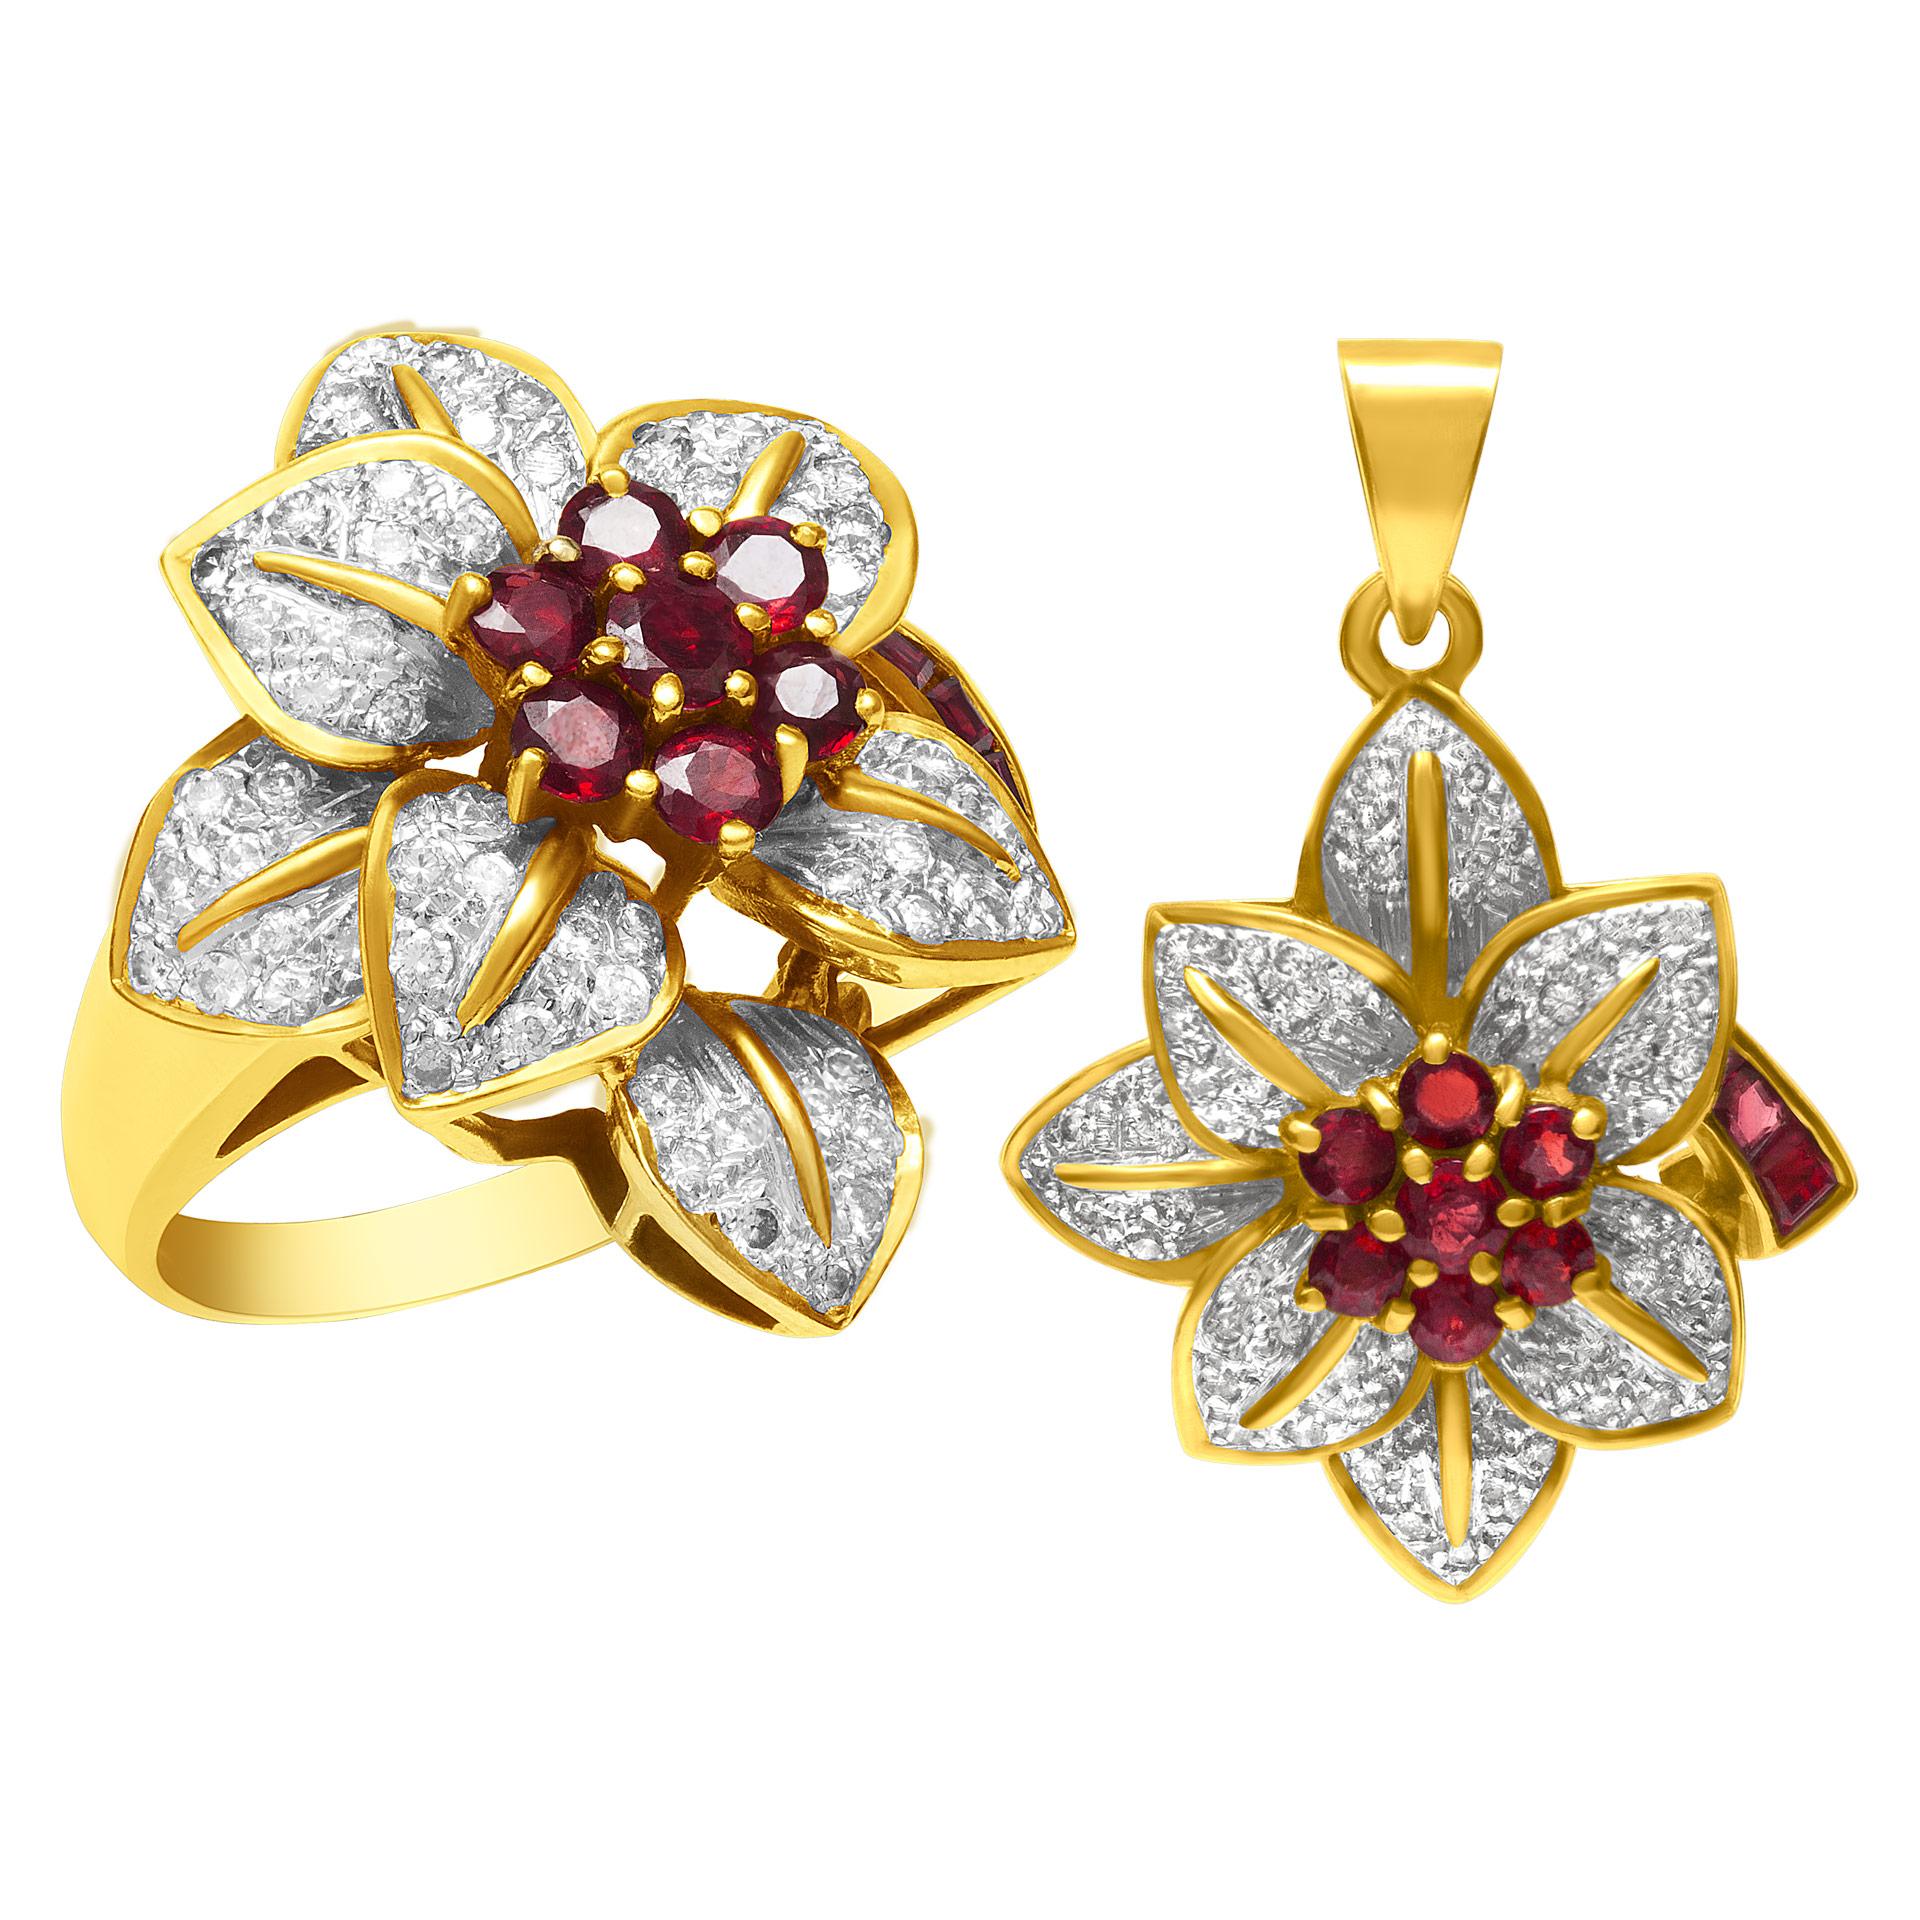 Ruby and diamonds flower ring and pendant, 2 pieces set in 18k yellow gold. Round brilliant cut diamond approx. total weight: 1 carat, diamonds are eye clean and white. Round rubies total approx. weight: 0.10 carat. Pendant 30. mm x 20 mm. Ring